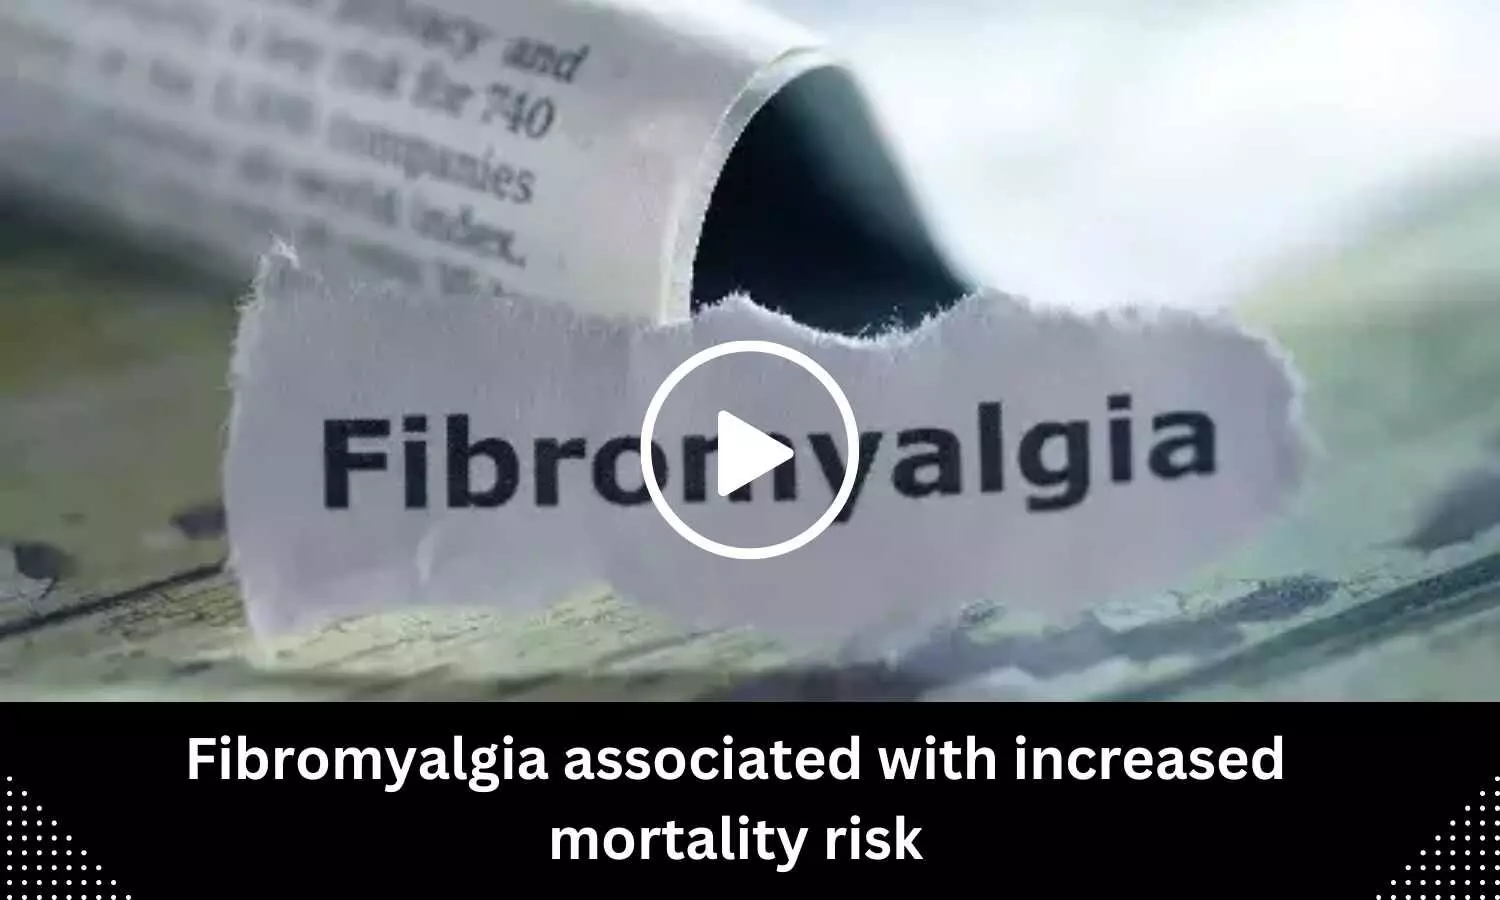 Fibromyalgia associated with increased mortality risk